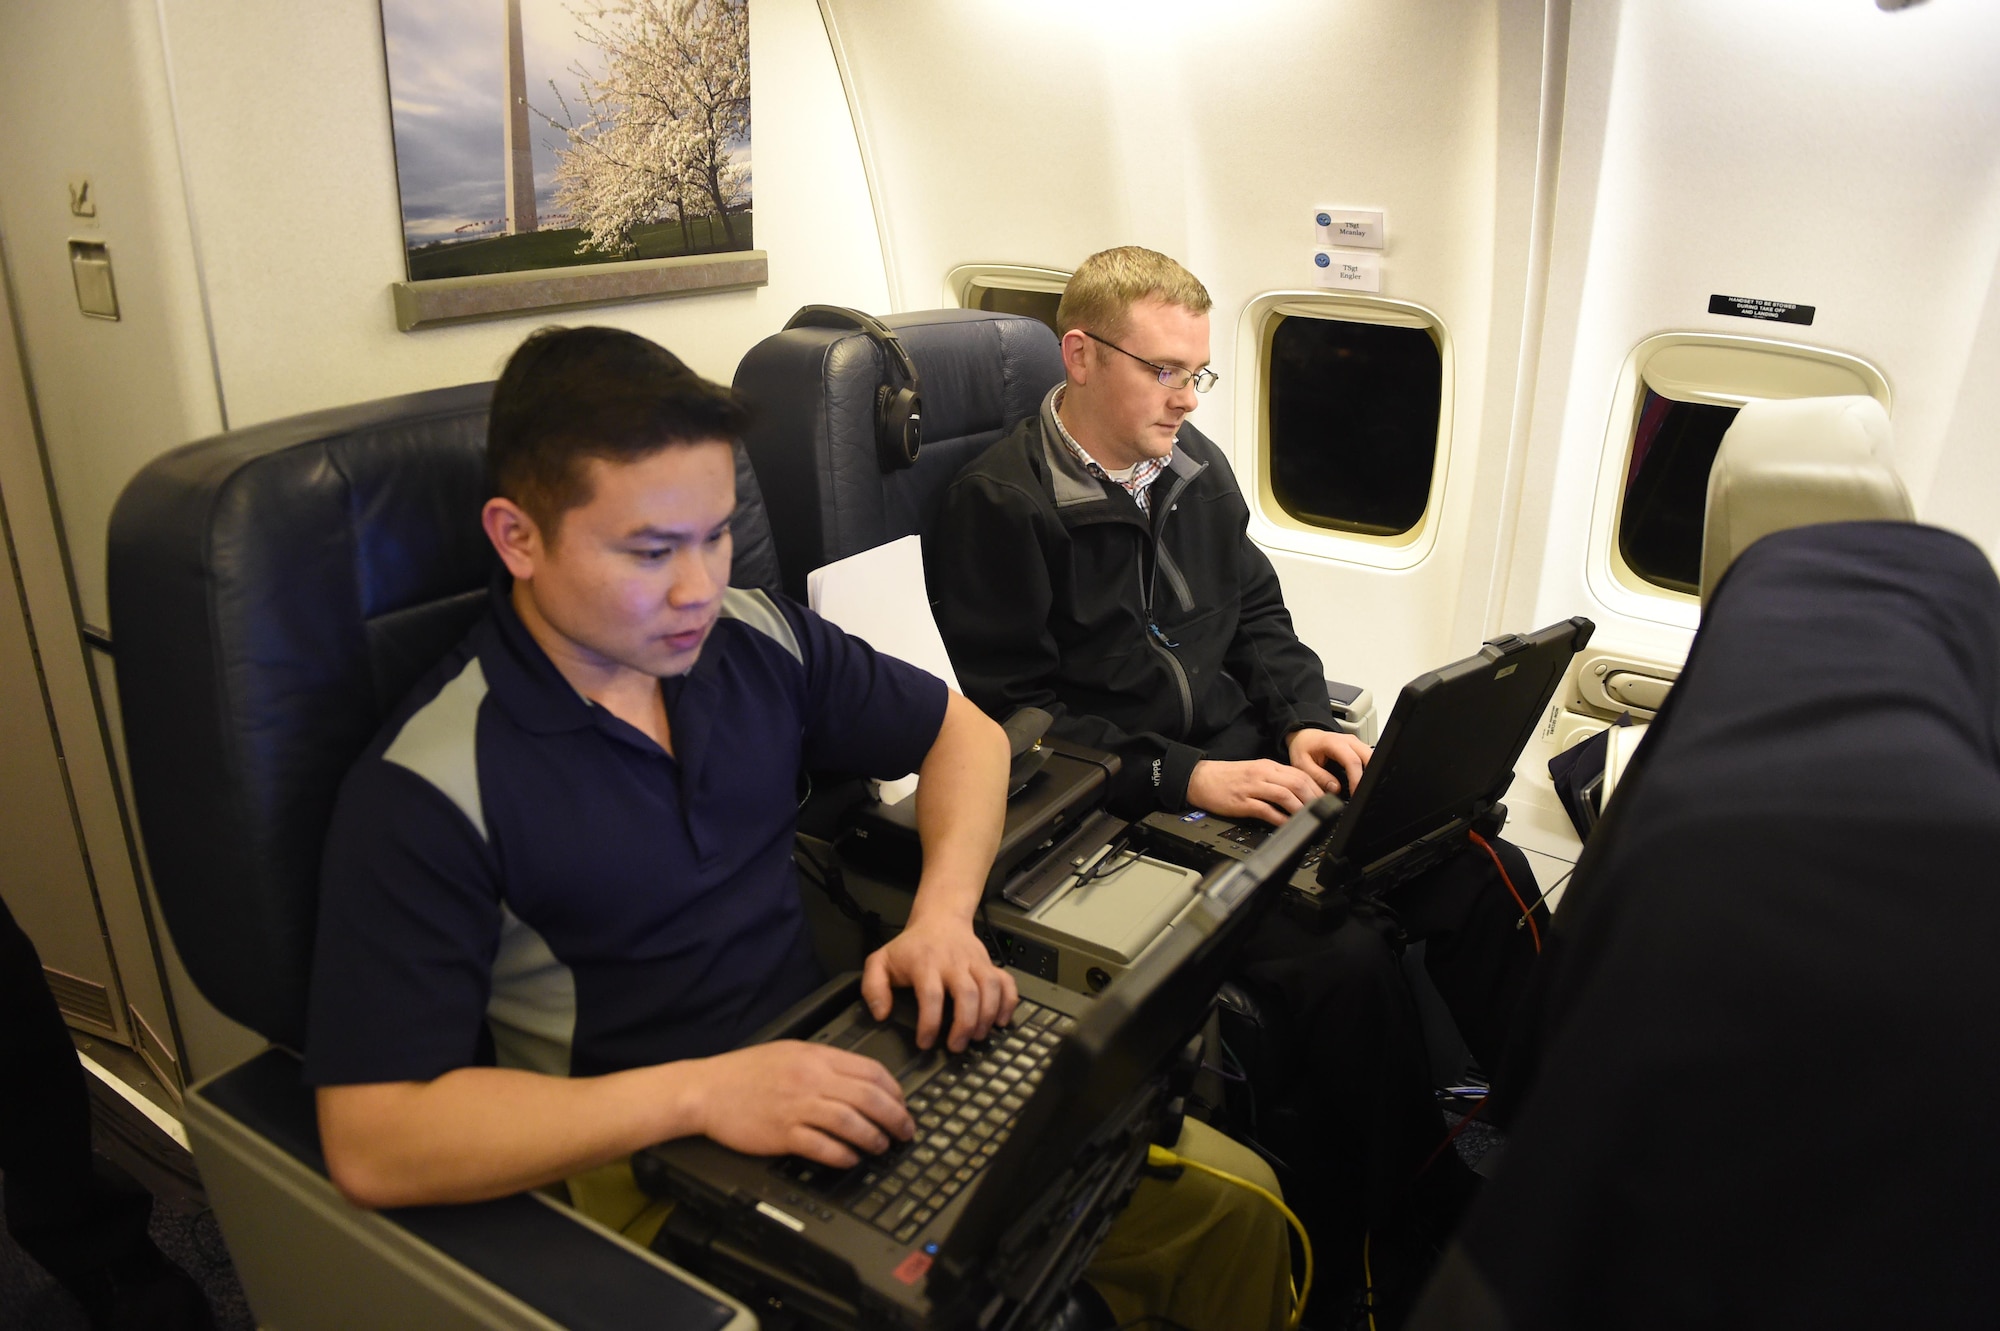 Tech. Sgts. Jacques Mcanlay, left, and Jared Engler provide tech and communications support to Defense Secretary Ash Carter and his staff aboard a C-32 military aircraft during a recent trip to the West Coast. (U.S. Air Force photo)